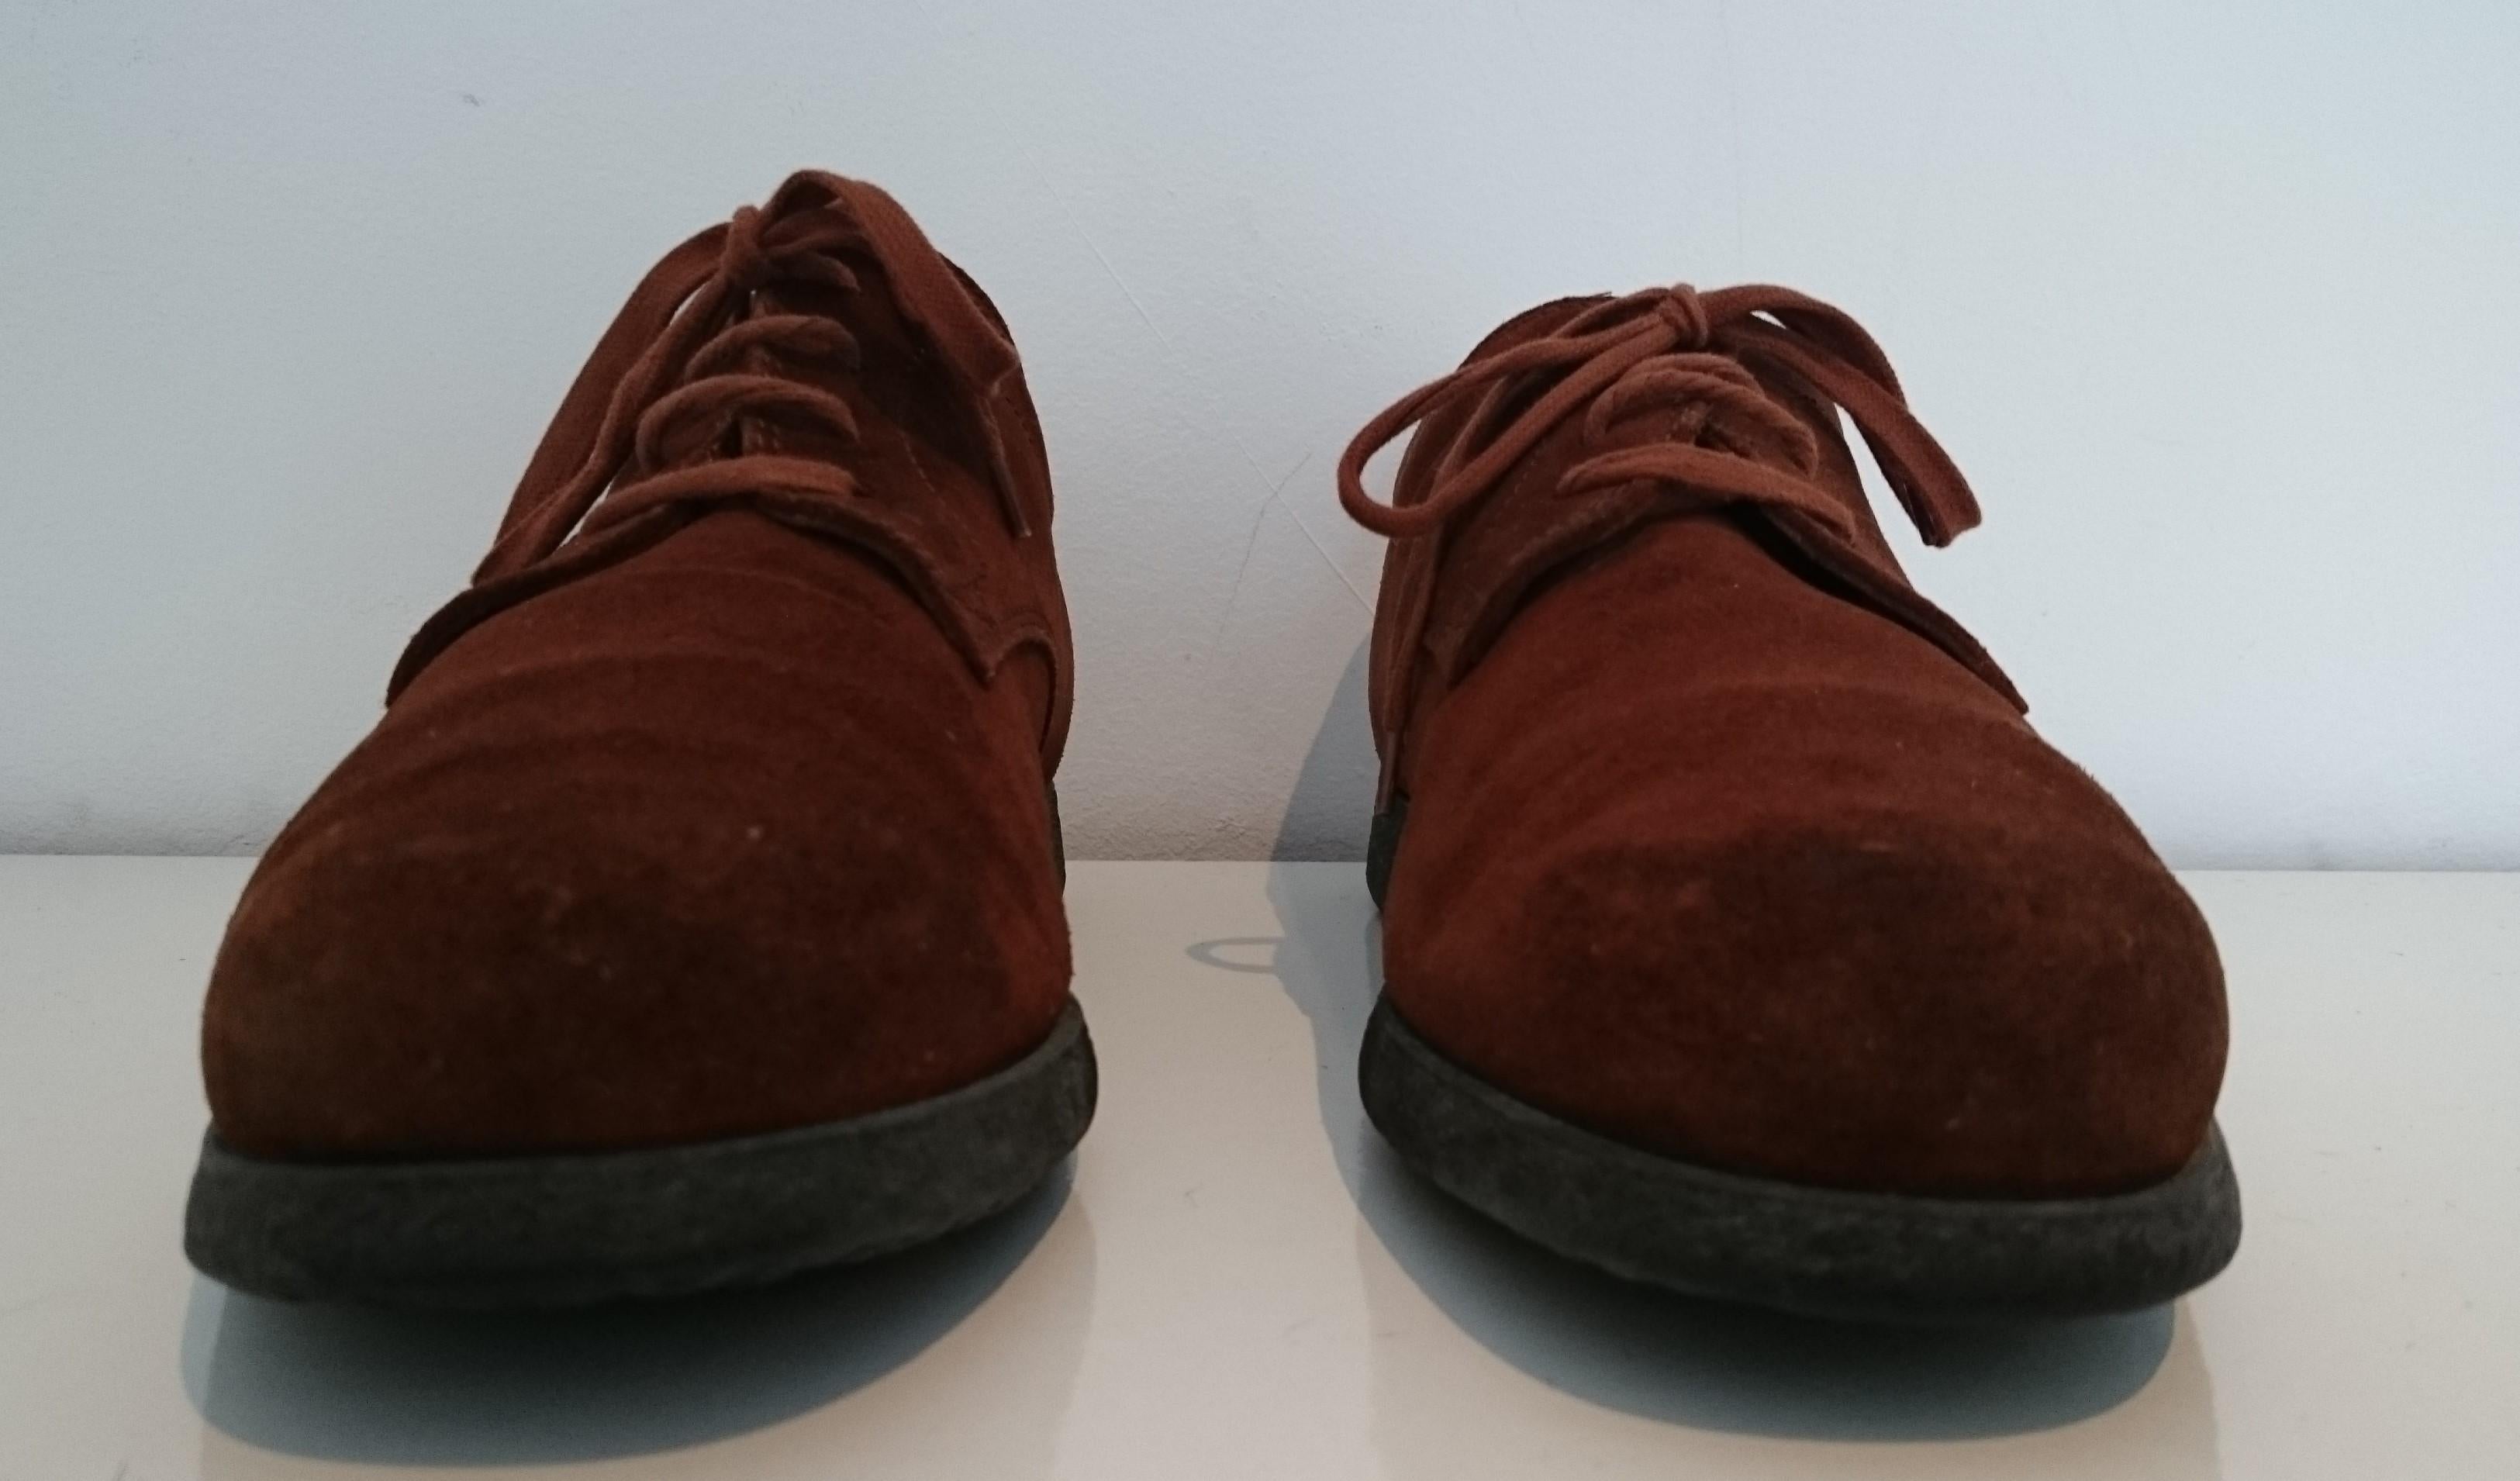 Tod's Laced Stringed Shoes for Men. 
Suede & Leather.
Color: Brown
Conditions: Excellent 
Size 8 (UK)
